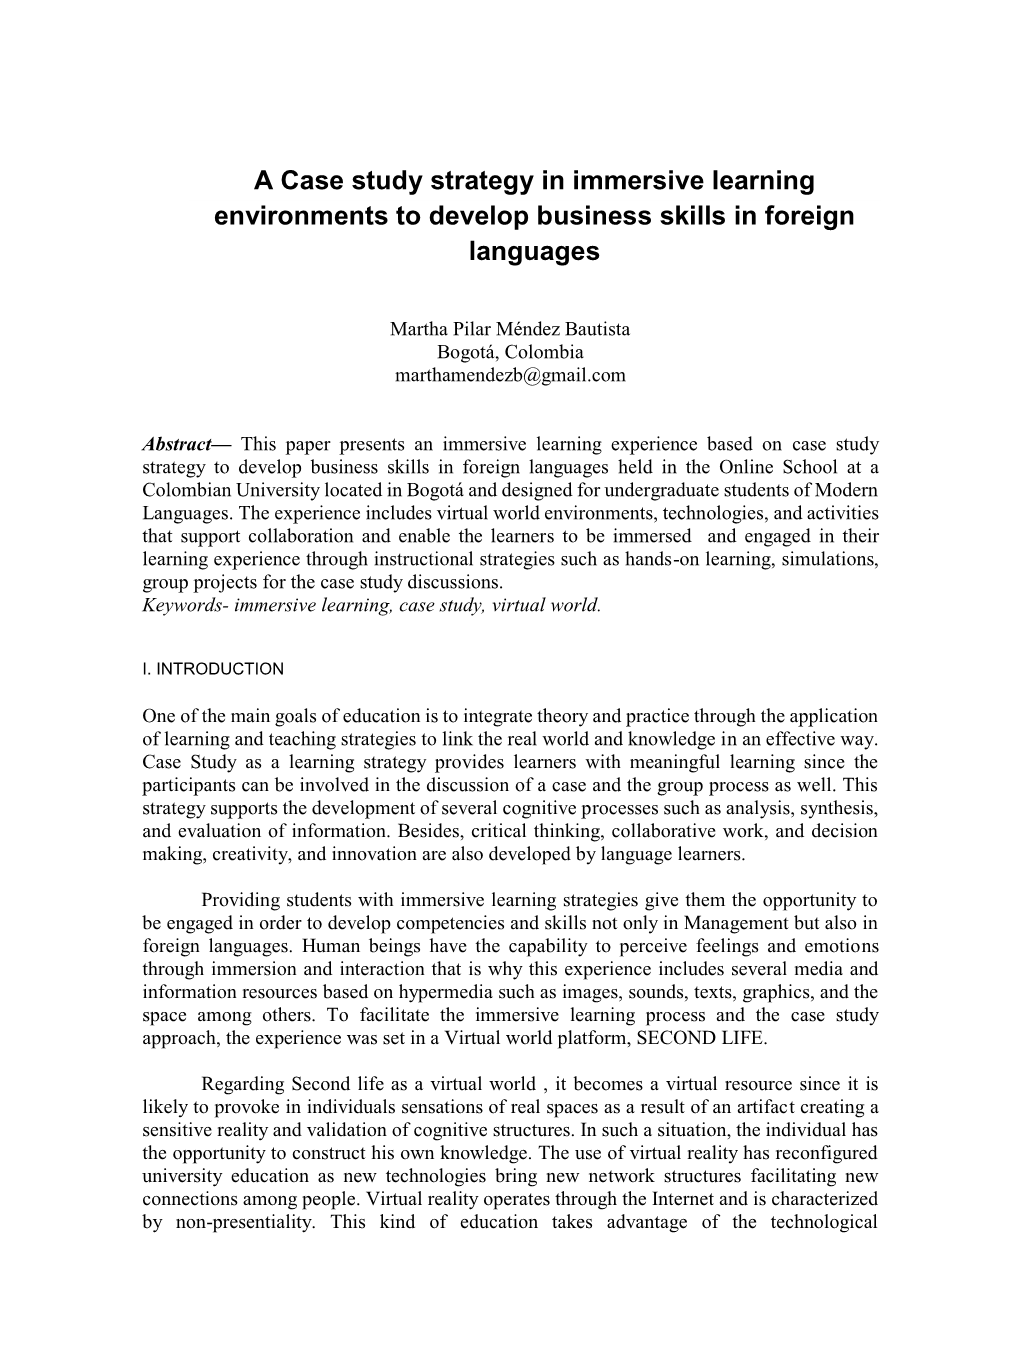 A Case Study Strategy in Immersive Learning Environments to Develop Business Skills in Foreign Languages